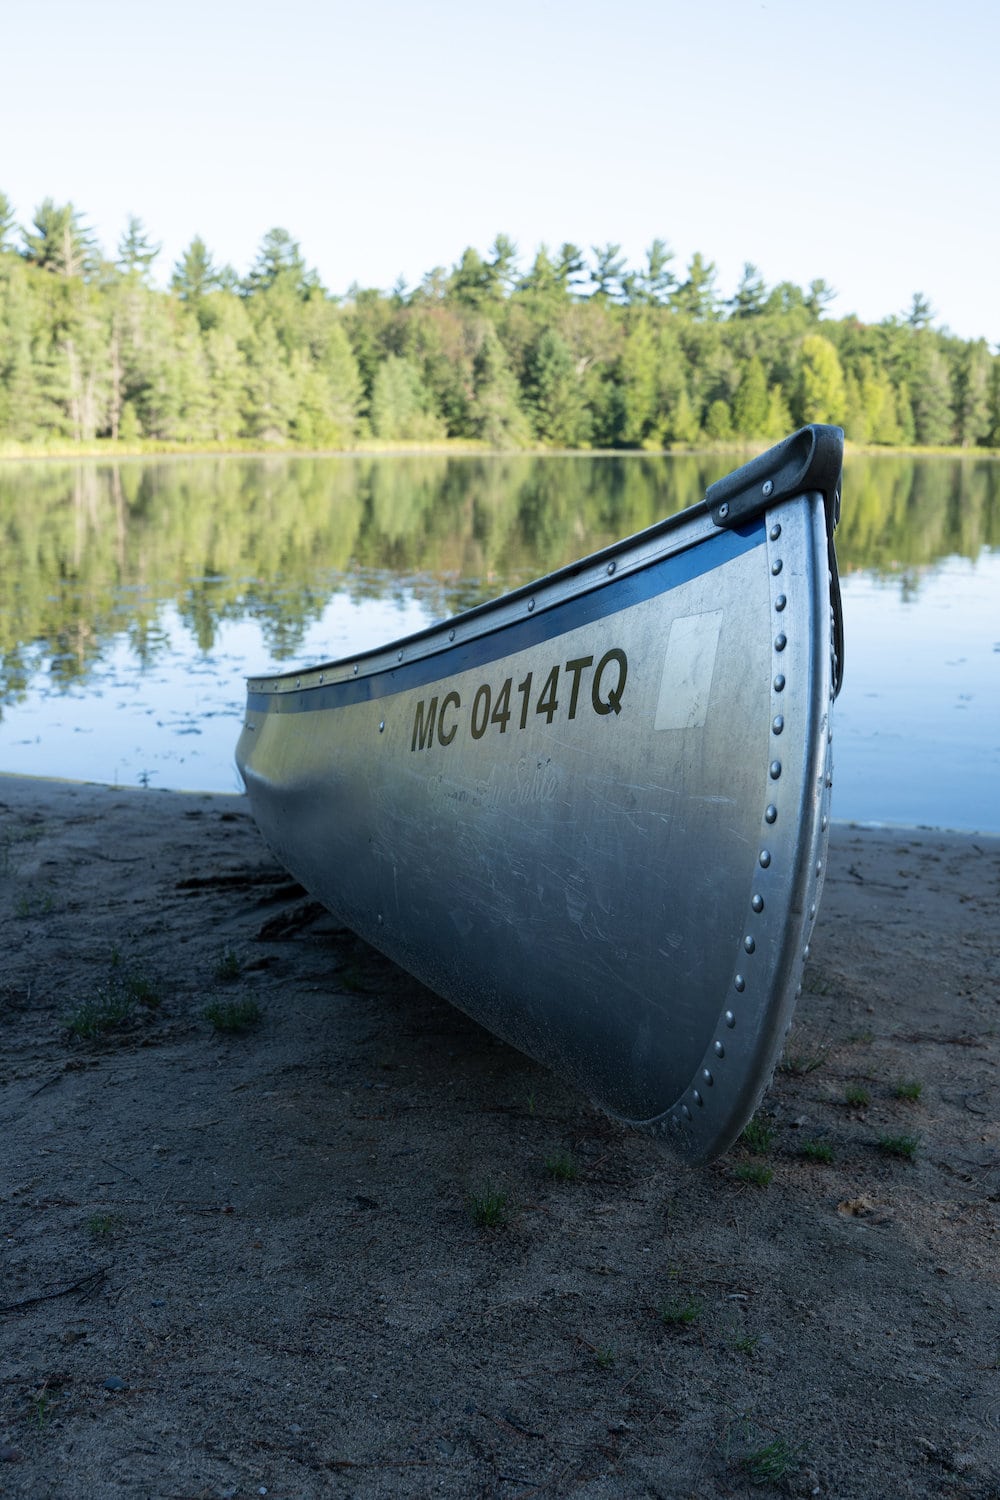 Photograph of a aluminum canoe the bank of a lake, un edited, color and contrast are flat